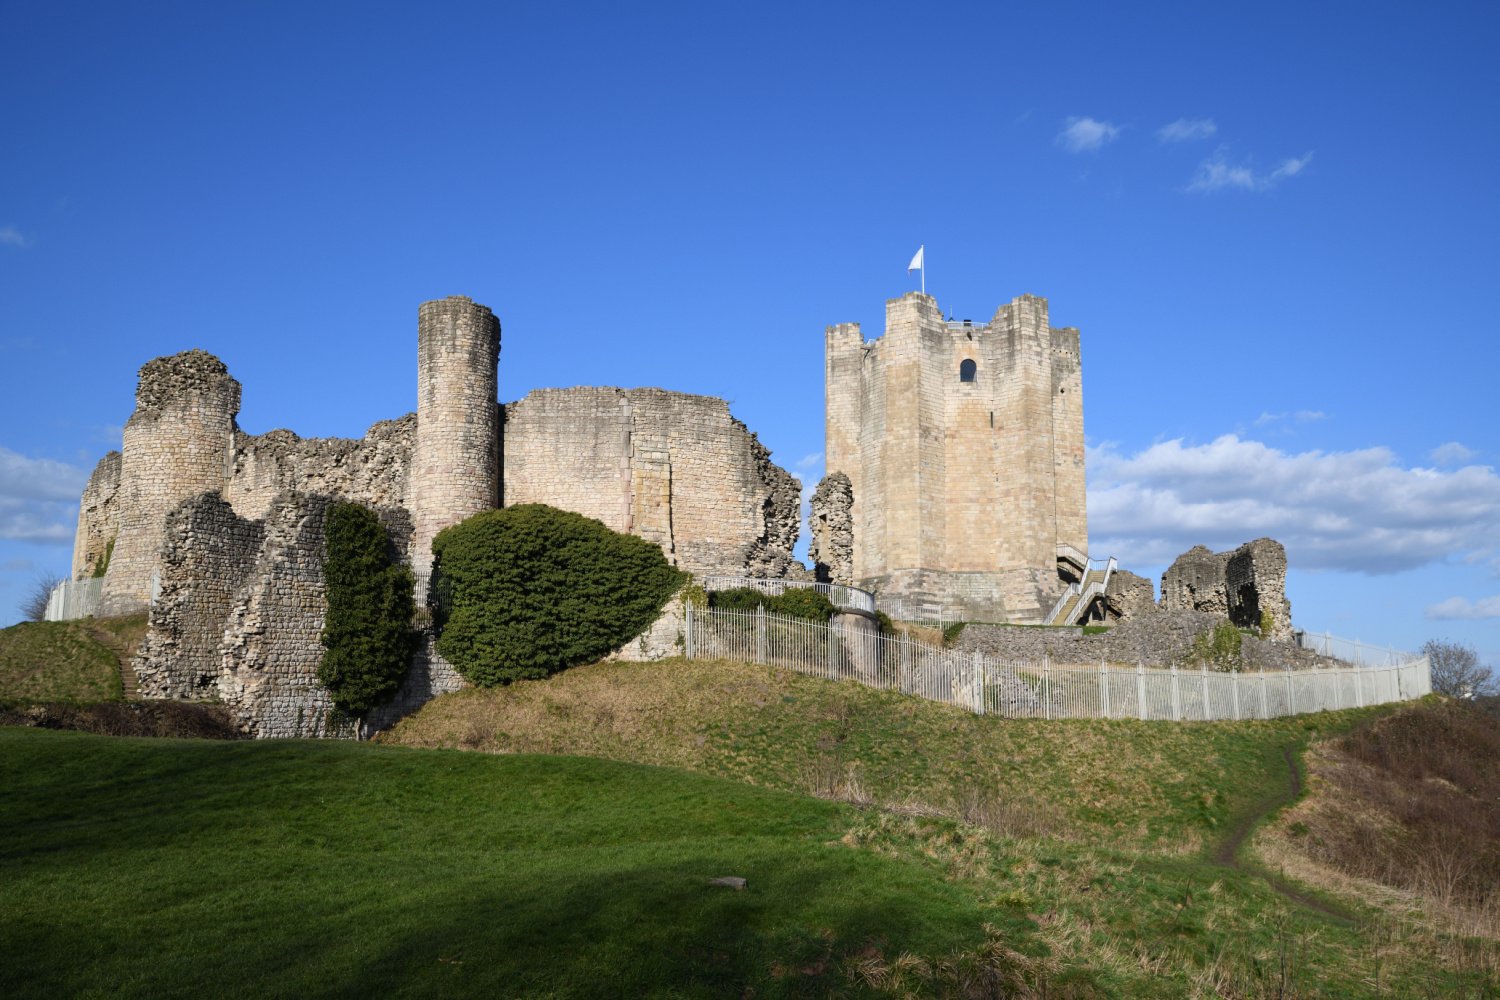 Image name conisbrough castle near doncaster south yorkshire the 14 image from the post A look at the history of Conisbrough Castle, with Dr Emma Wells in Yorkshire.com.